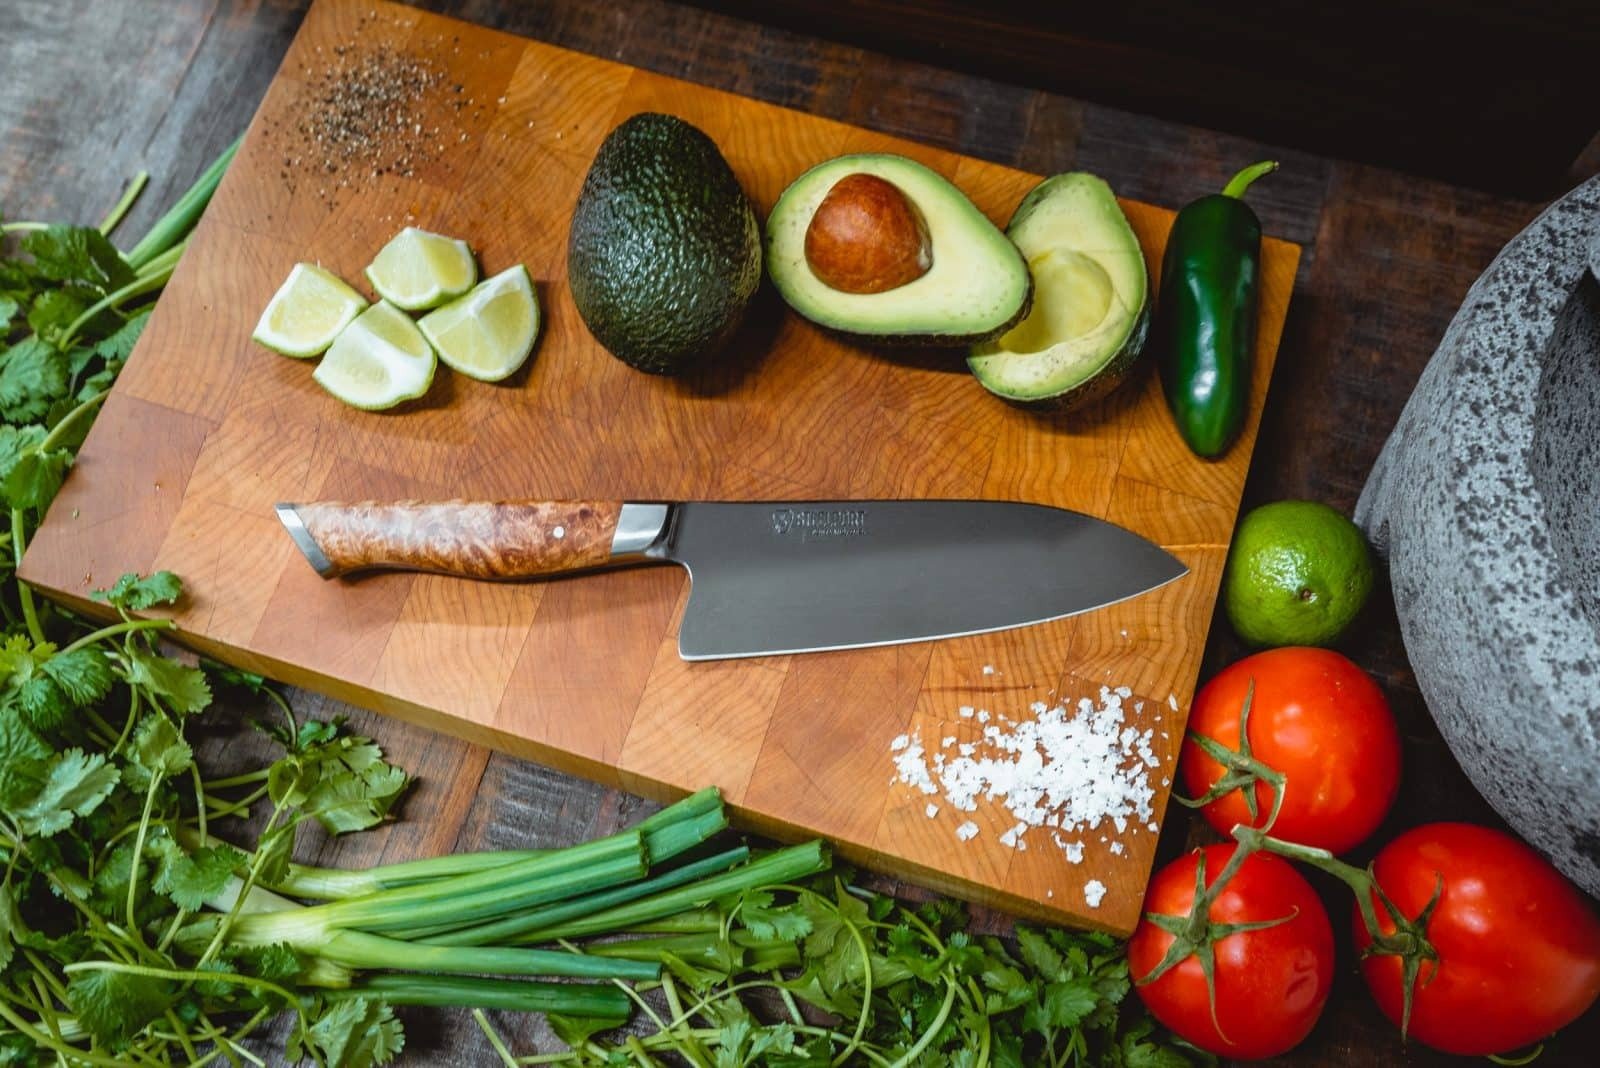 Cooking Knife 8 in - Carbon Steel - Olive Wood Handle